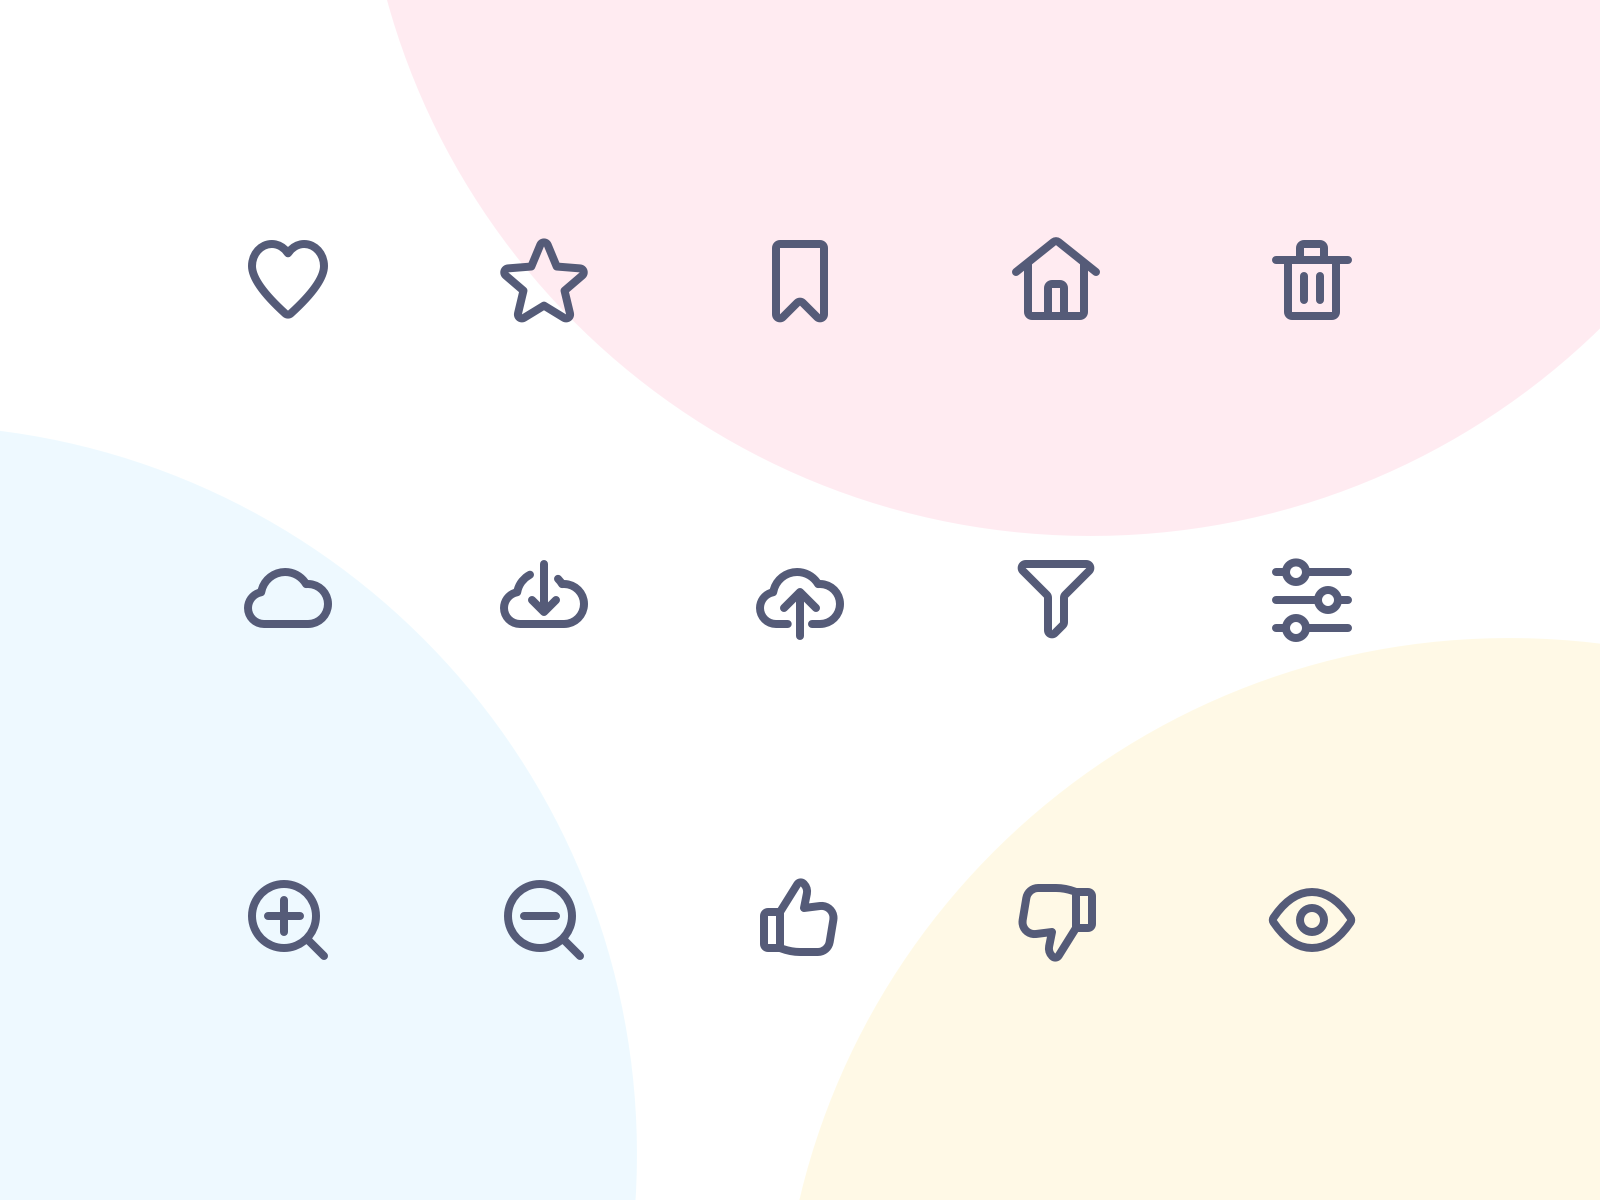 Jollycons - UI 2 - Icon Set by Jollycons on Dribbble